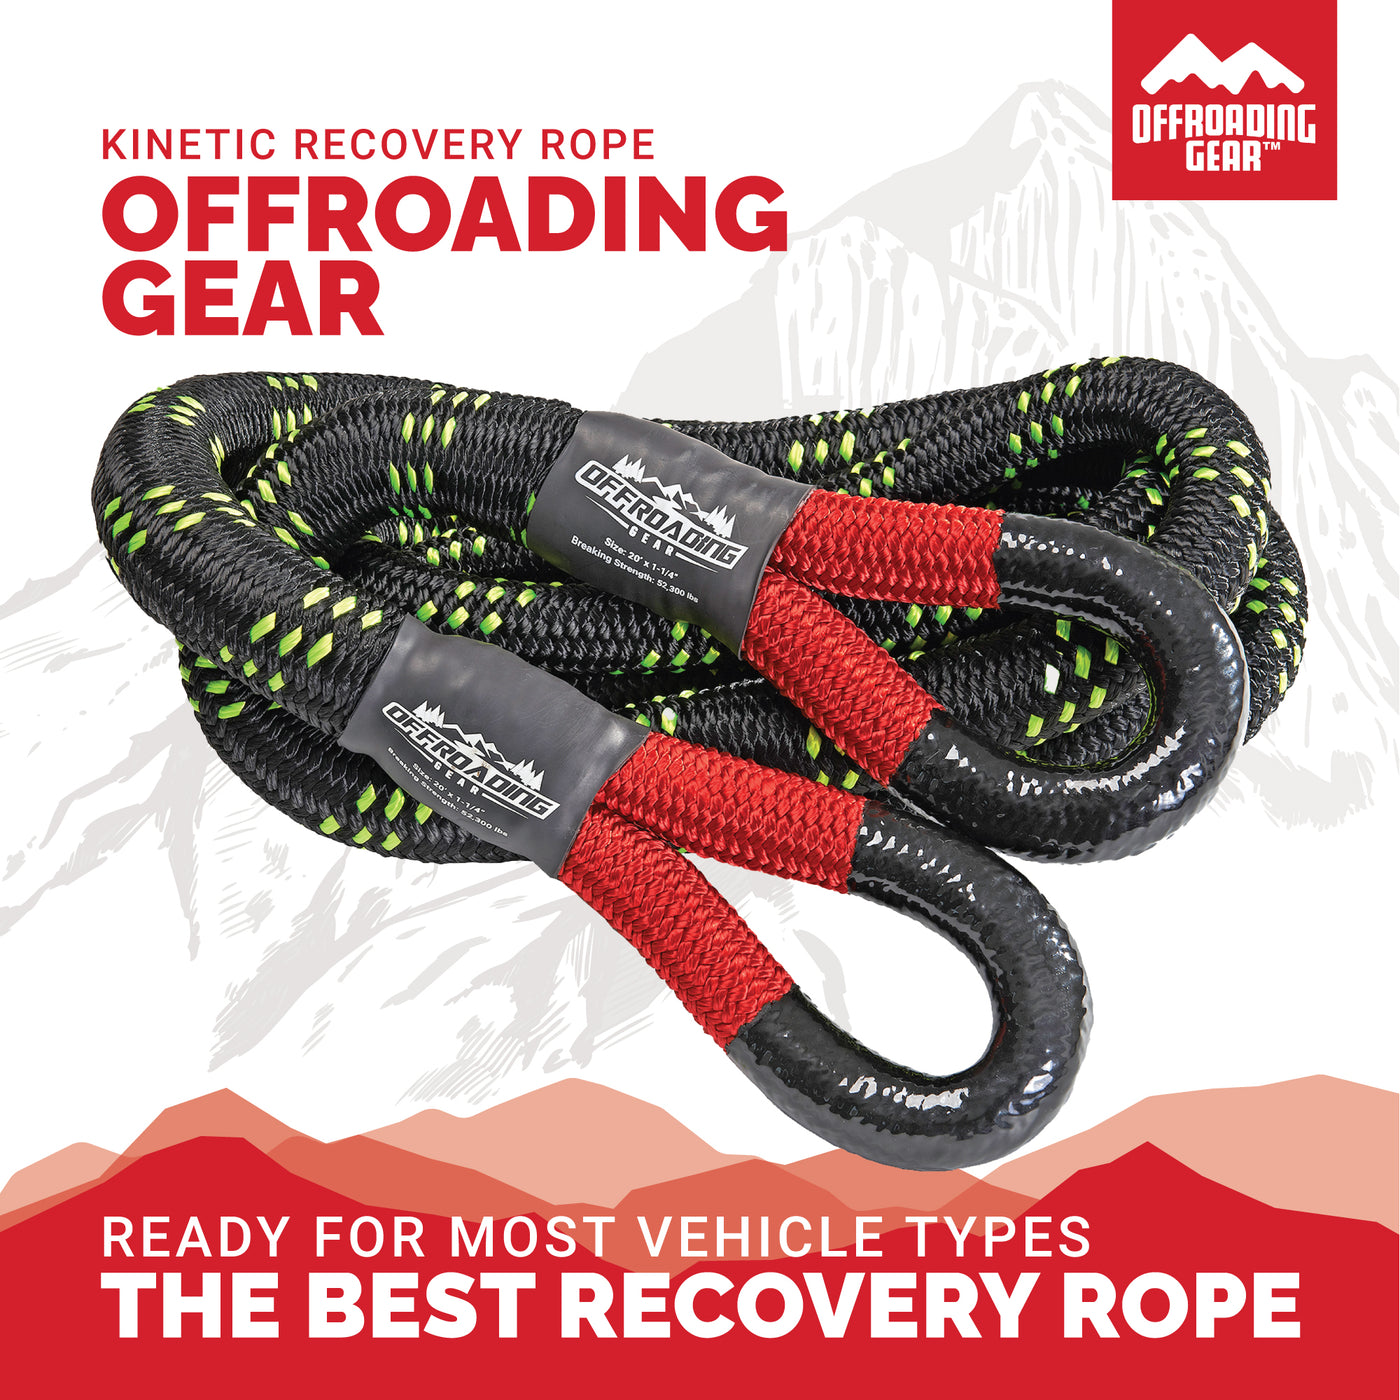 Offroading Gear 20'x7/8 Kinetic Recovery & Tow Rope, Black (28,600 lbs) for 4x4/Off-Roading/Jeep/Car/SUV/ATV